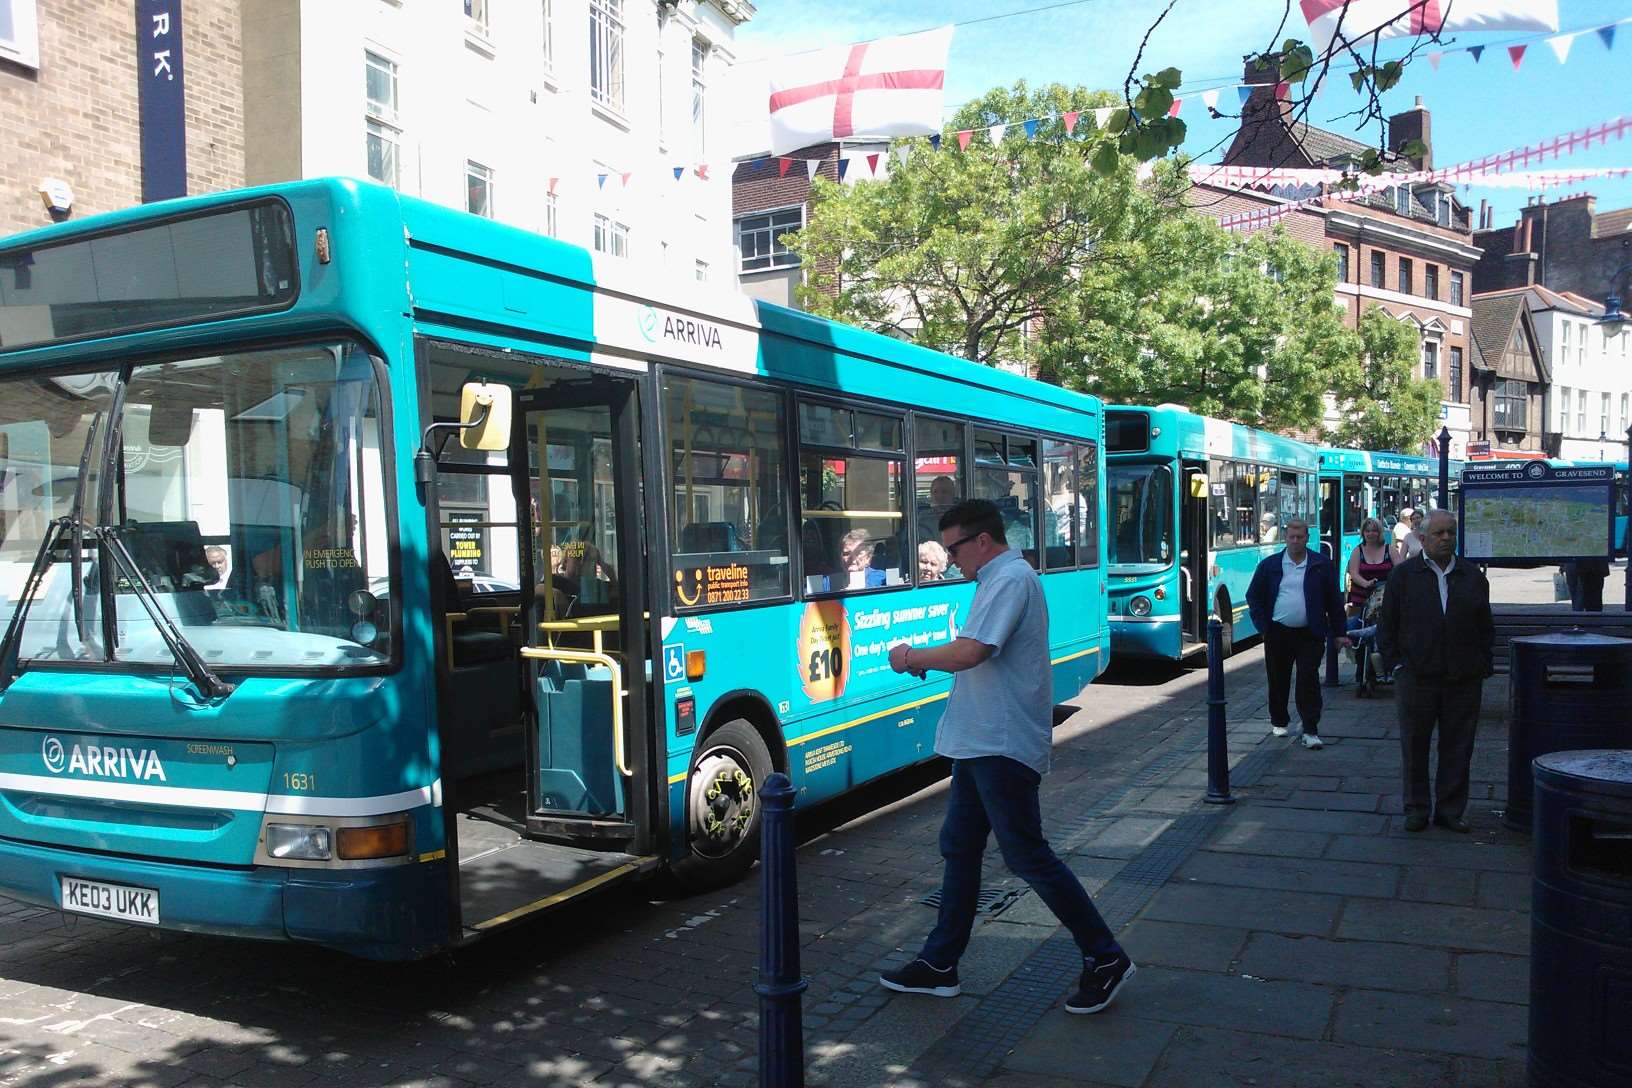 The incident caused bus gridlock in the town centre